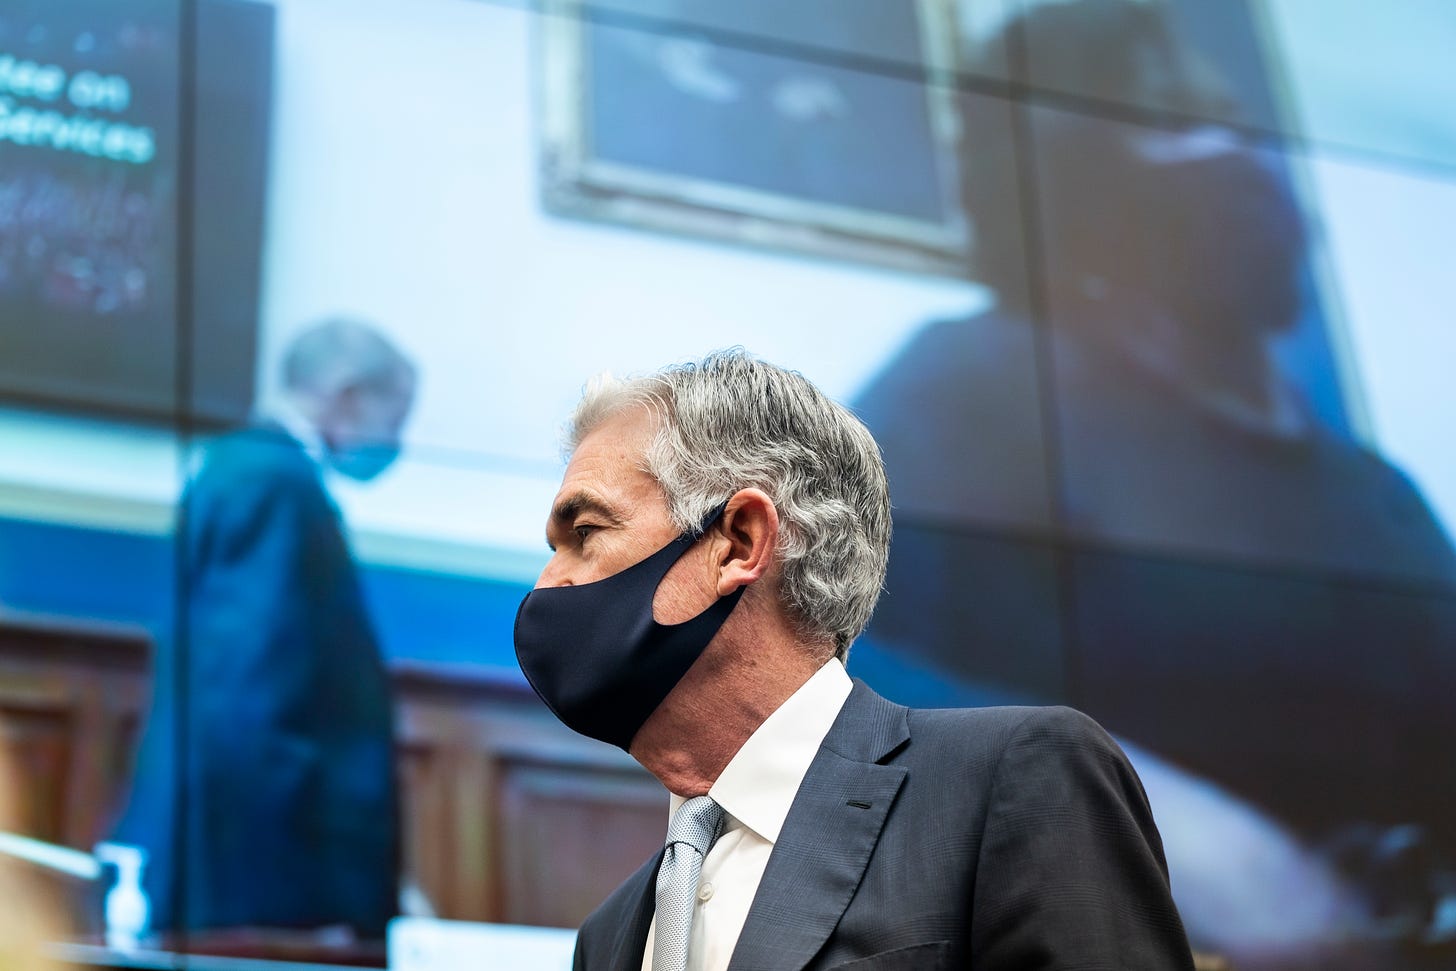 Federal Reserve Chair Jerome Powell prepares to speak at a House Financial Services Committee hearing on Oversight of the Treasury Department's and Federal Reserve's Pandemic Response in the Rayburn House Office Building on December 2, 2020 in Washington, DC. 